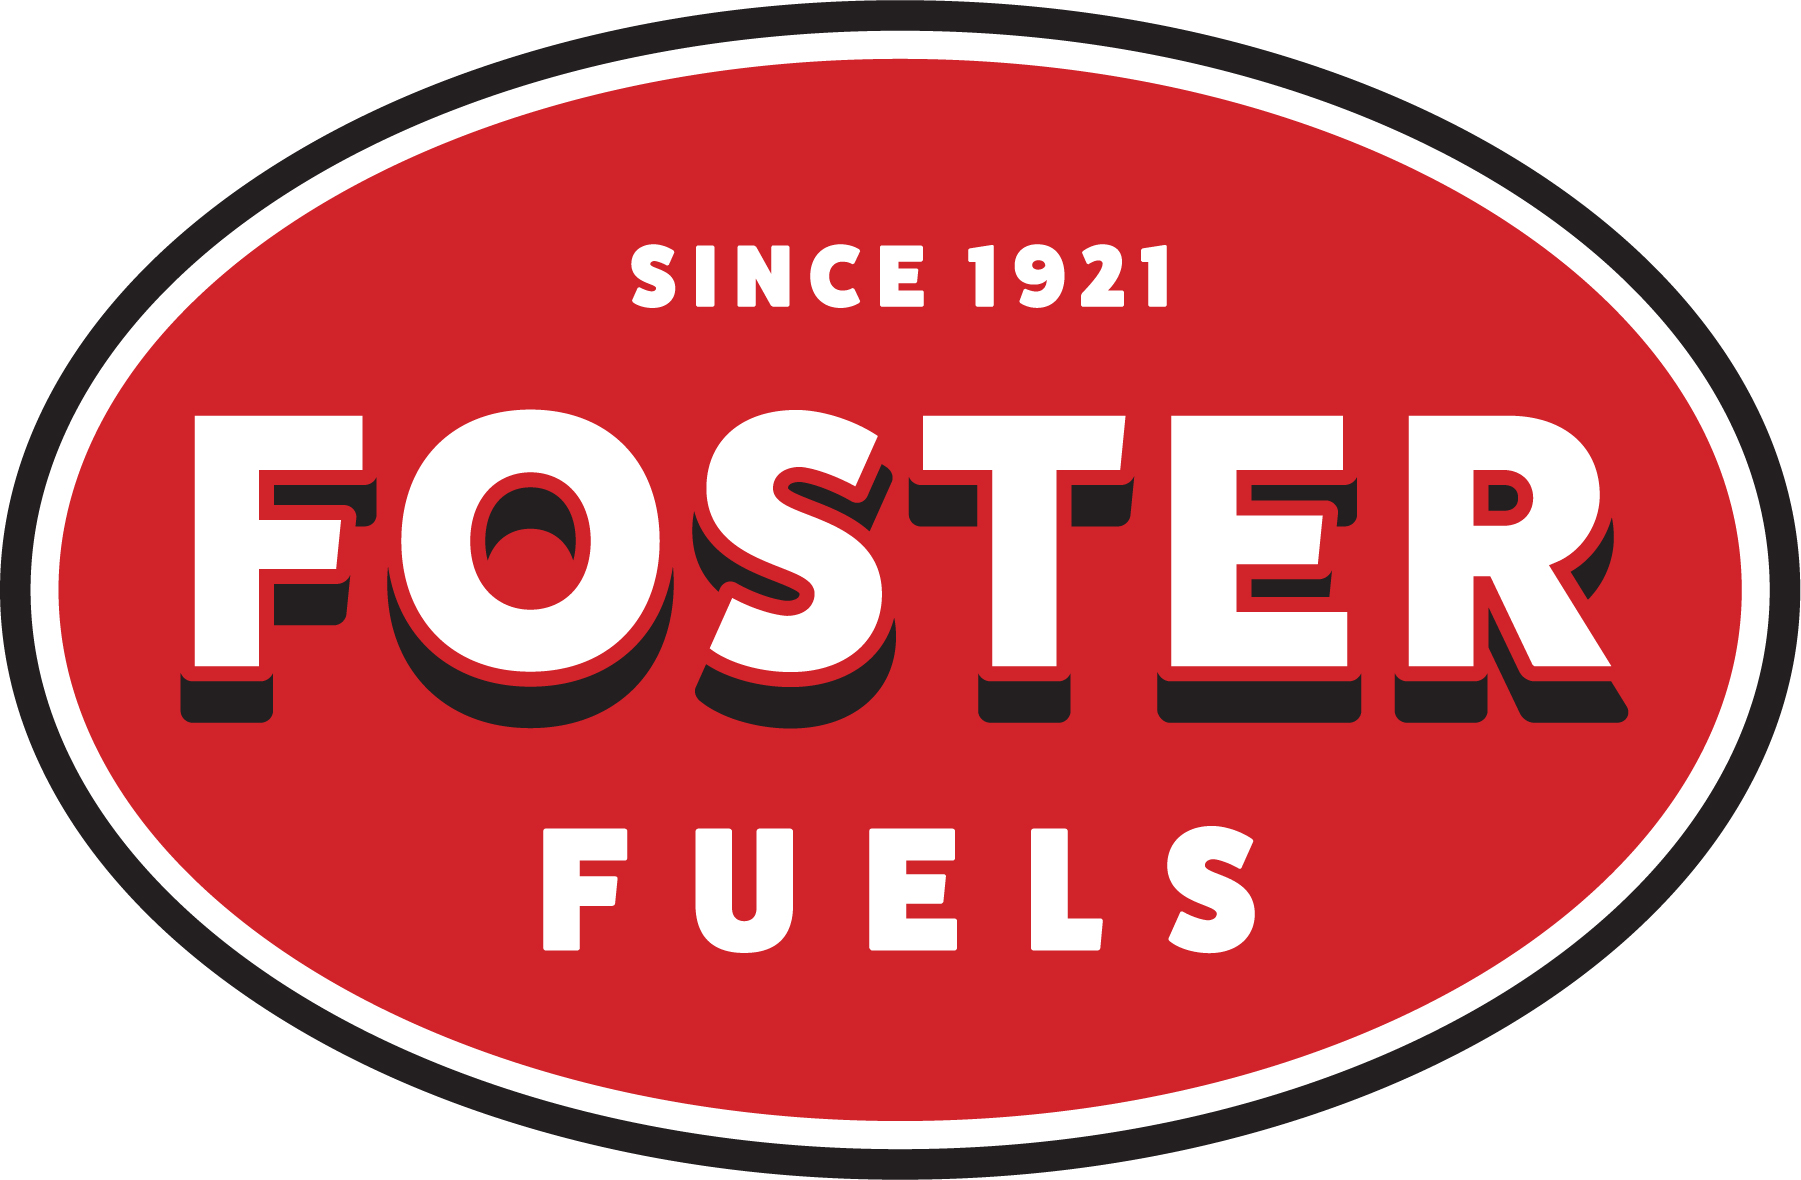 Central VA Headquartered Foster Fuels Awarded Another Five-Year Prime Contract for Federal Emergency Fuel Delivery